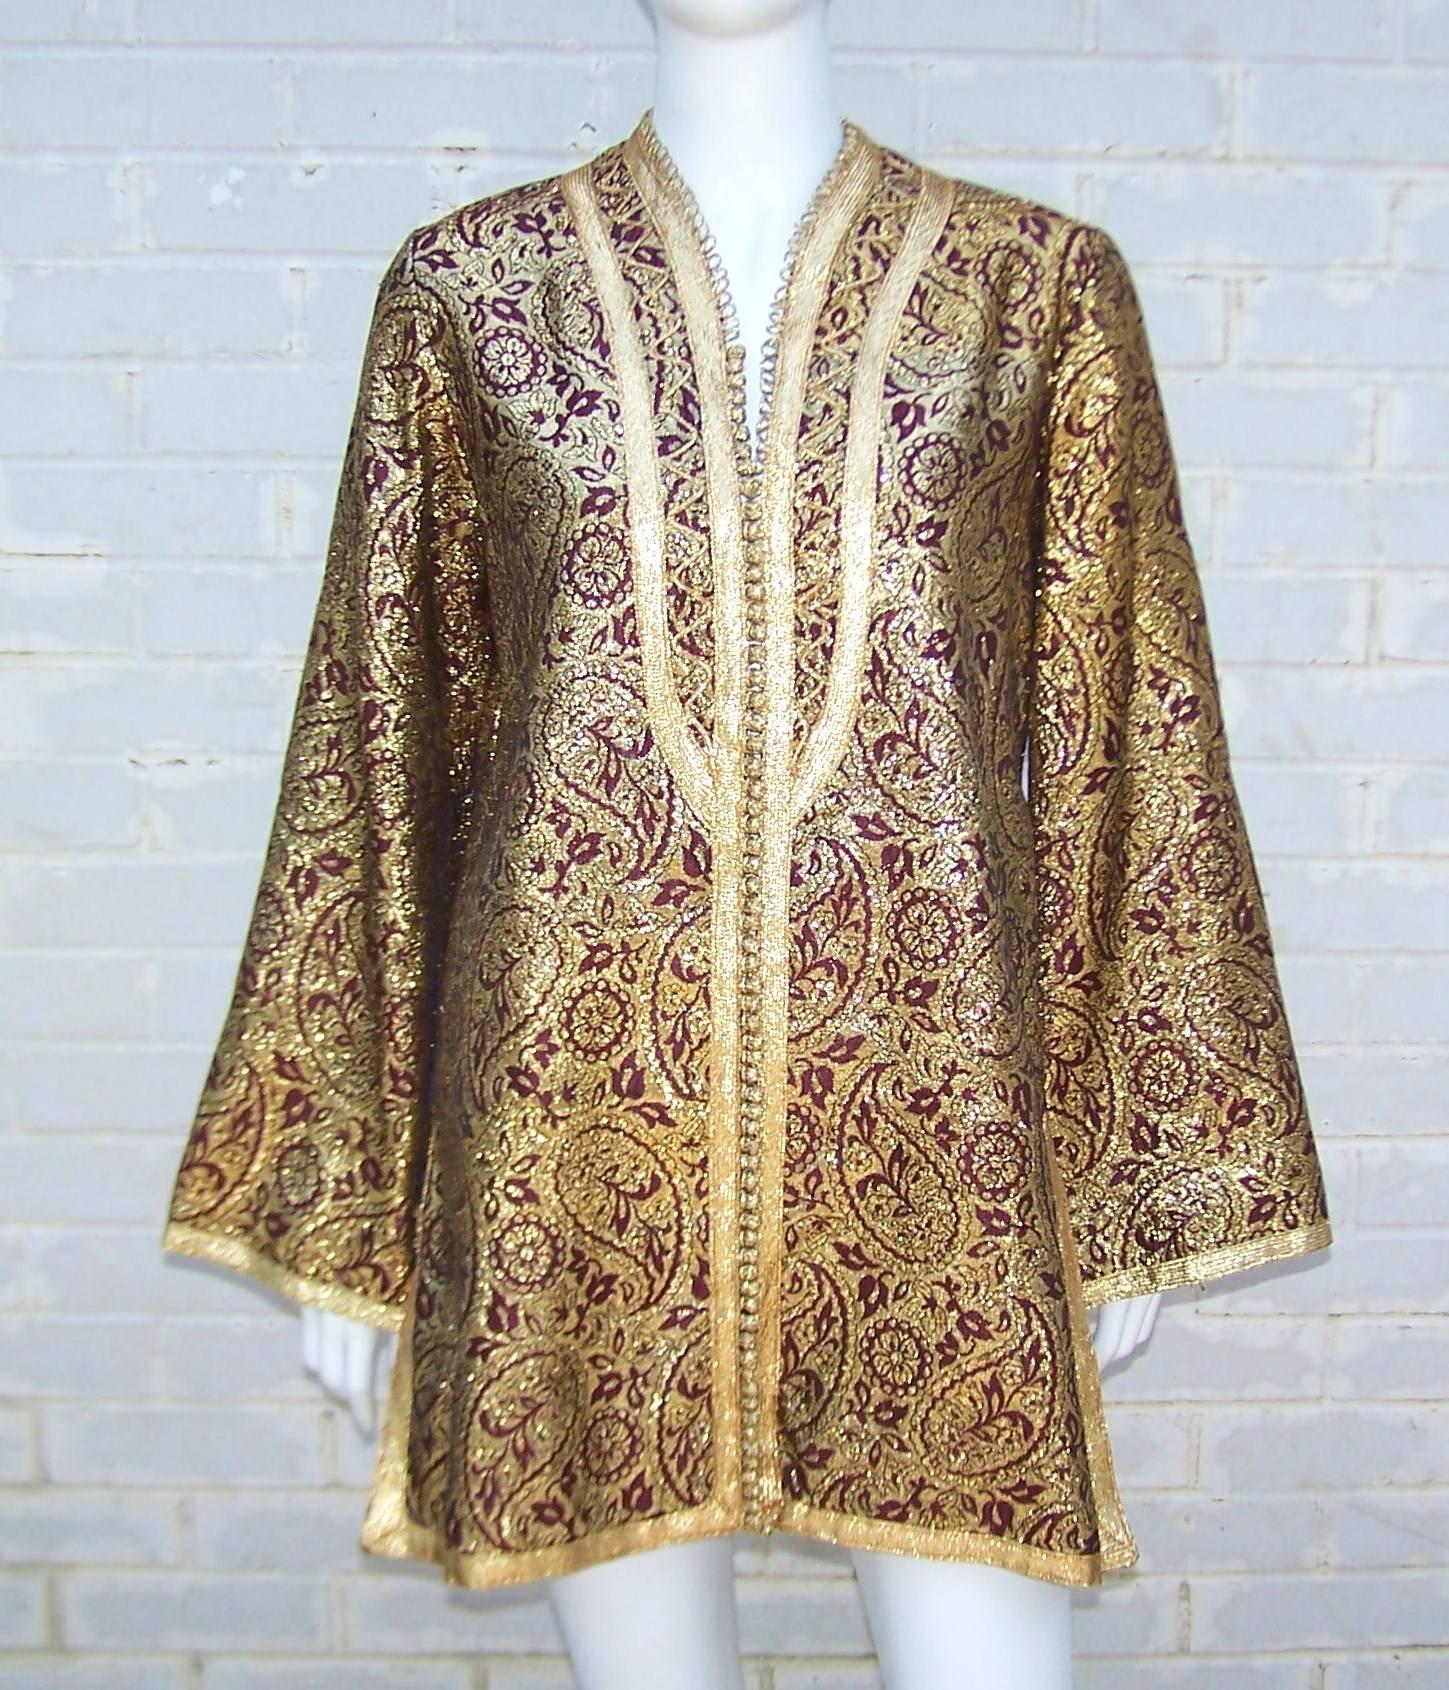 Greek designer, Dimitri Kritsas, brought this classic Moroccan tunic to the halls of New York fashion in the 1960s.  The tunic is made from exotically rich gold brocade with a burgundy red background and lining.  The mile long row of gold buttons